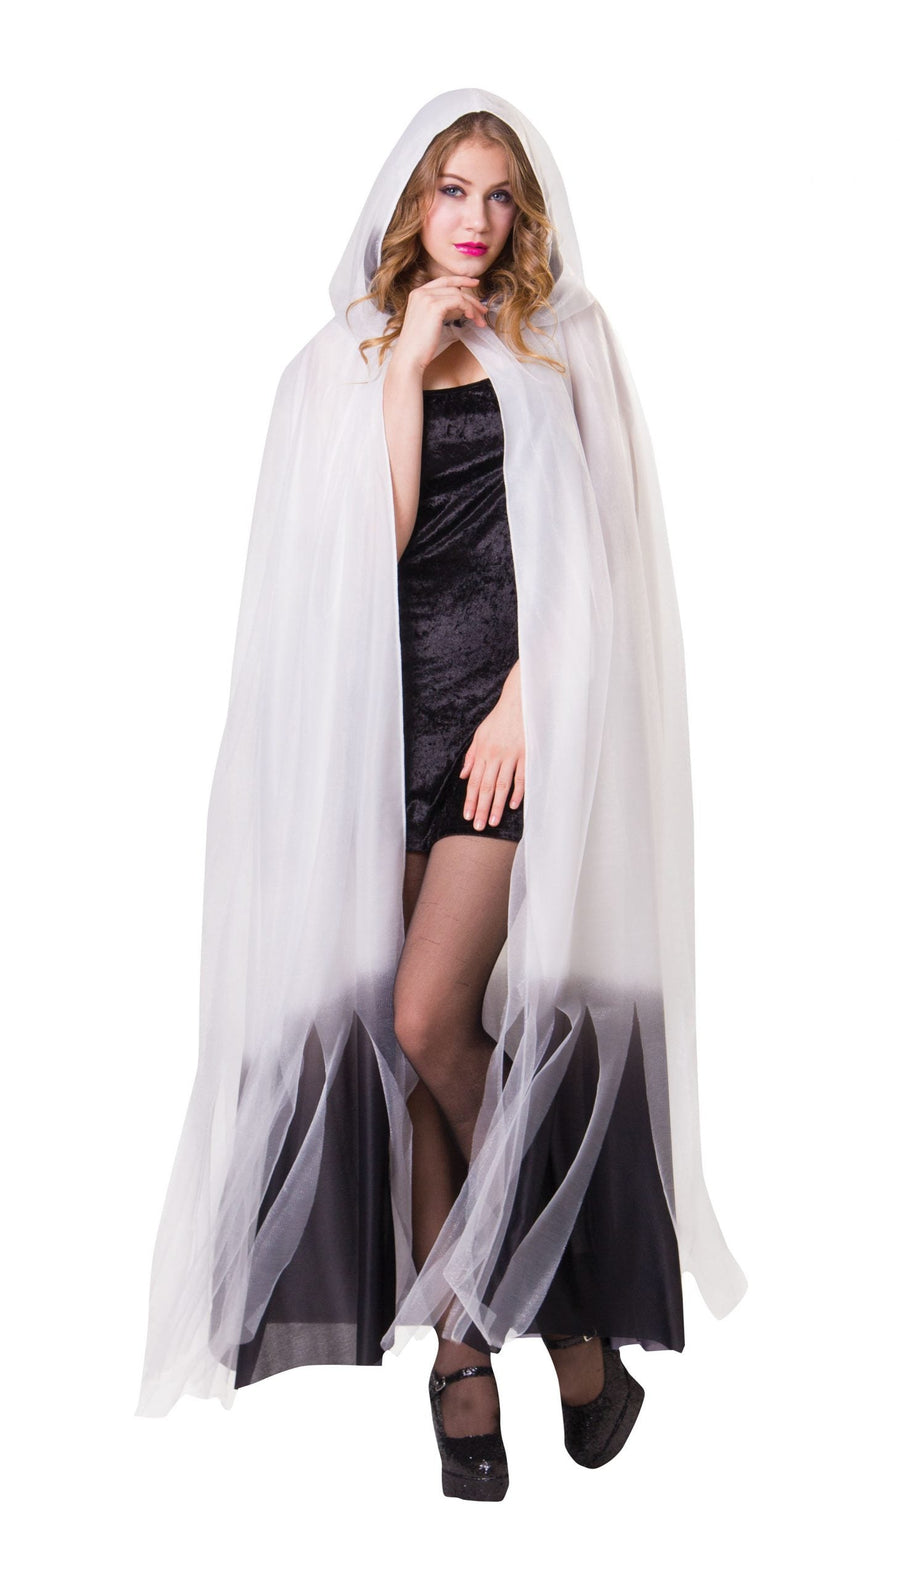 Hooded Cape White Ladies With Black Obmbre Finish Adult Costume Female_1